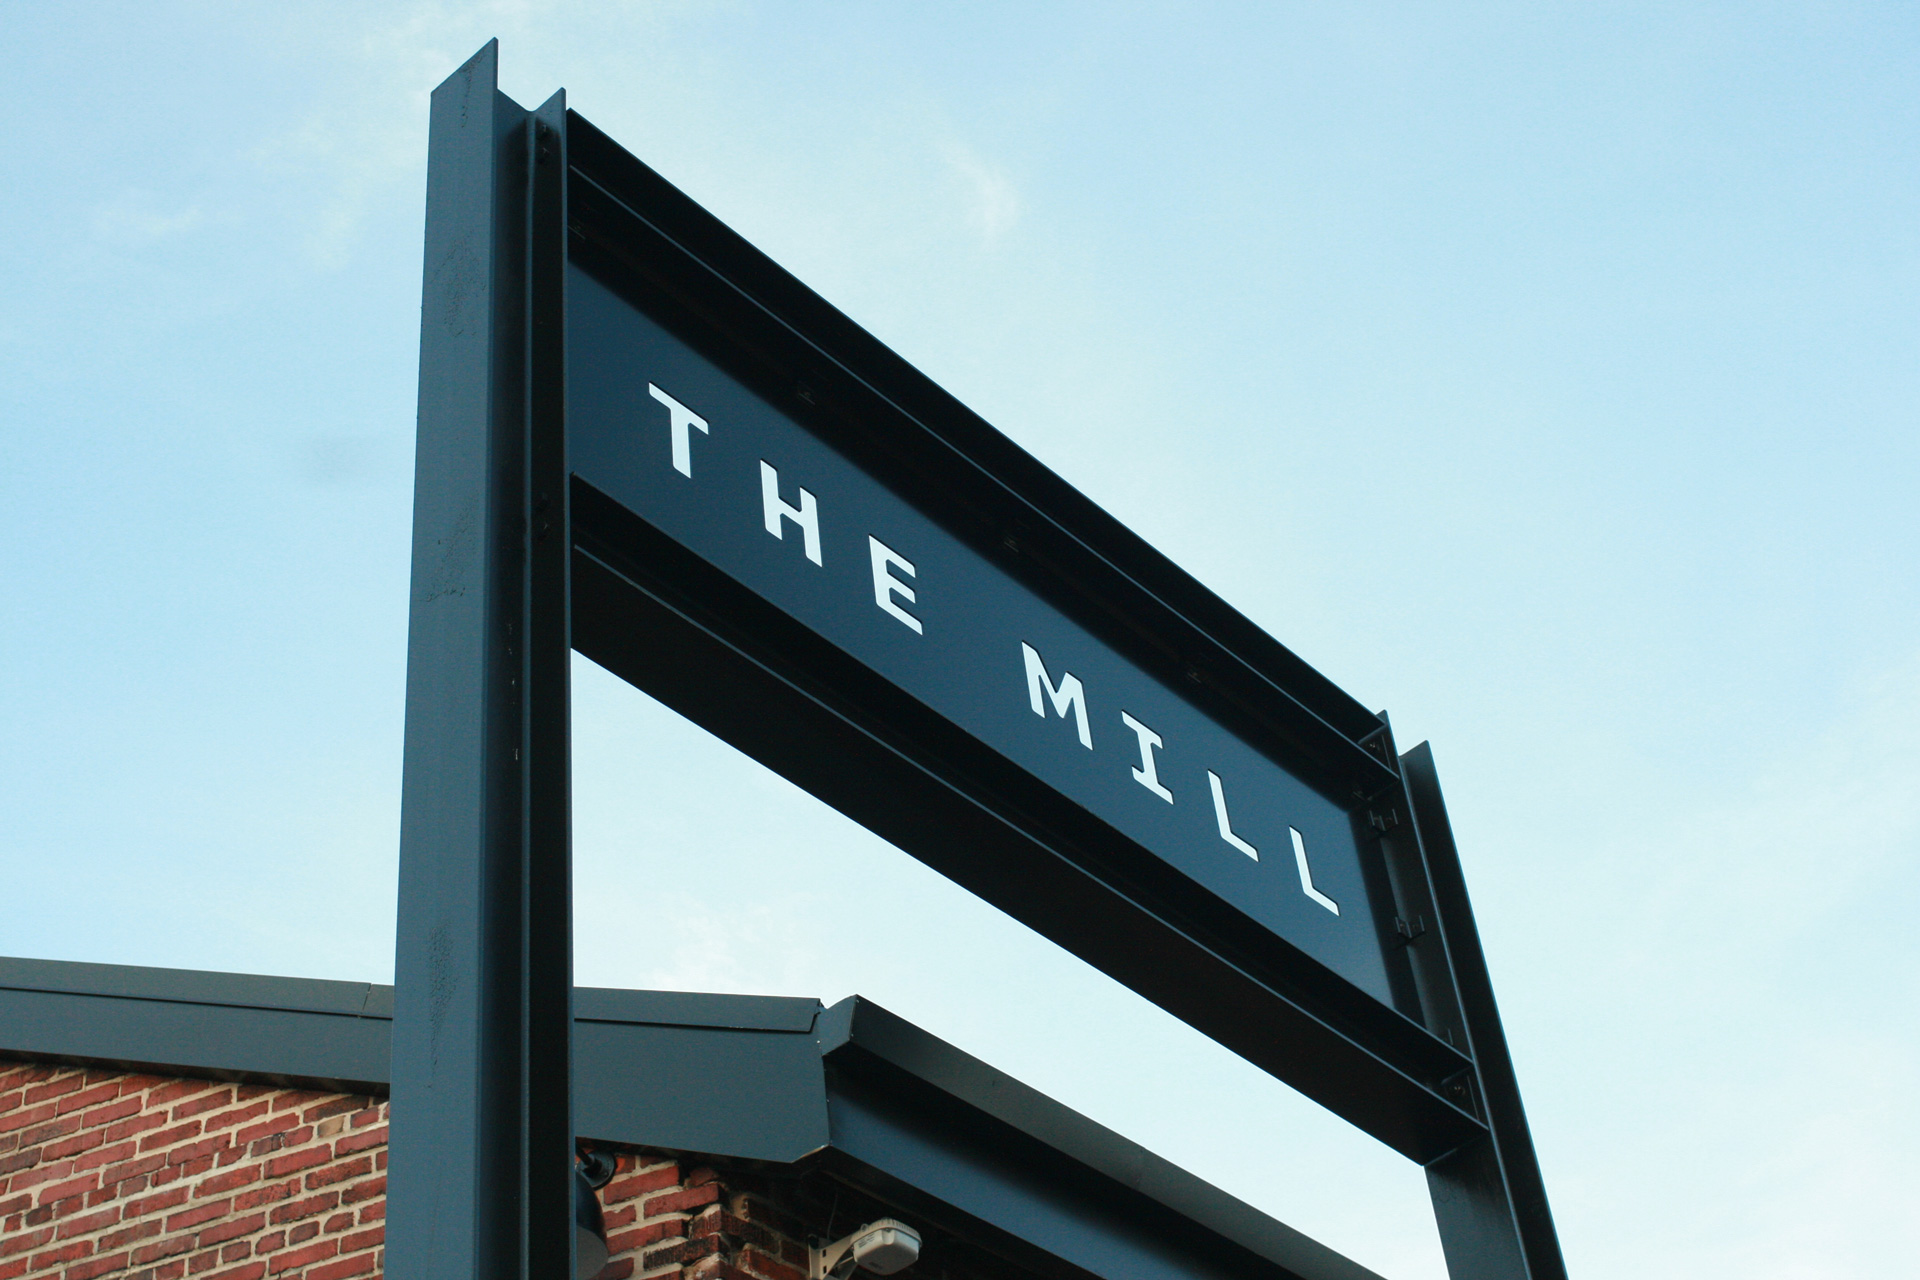 New Logo and Identity for The Mill by UnderConsideration